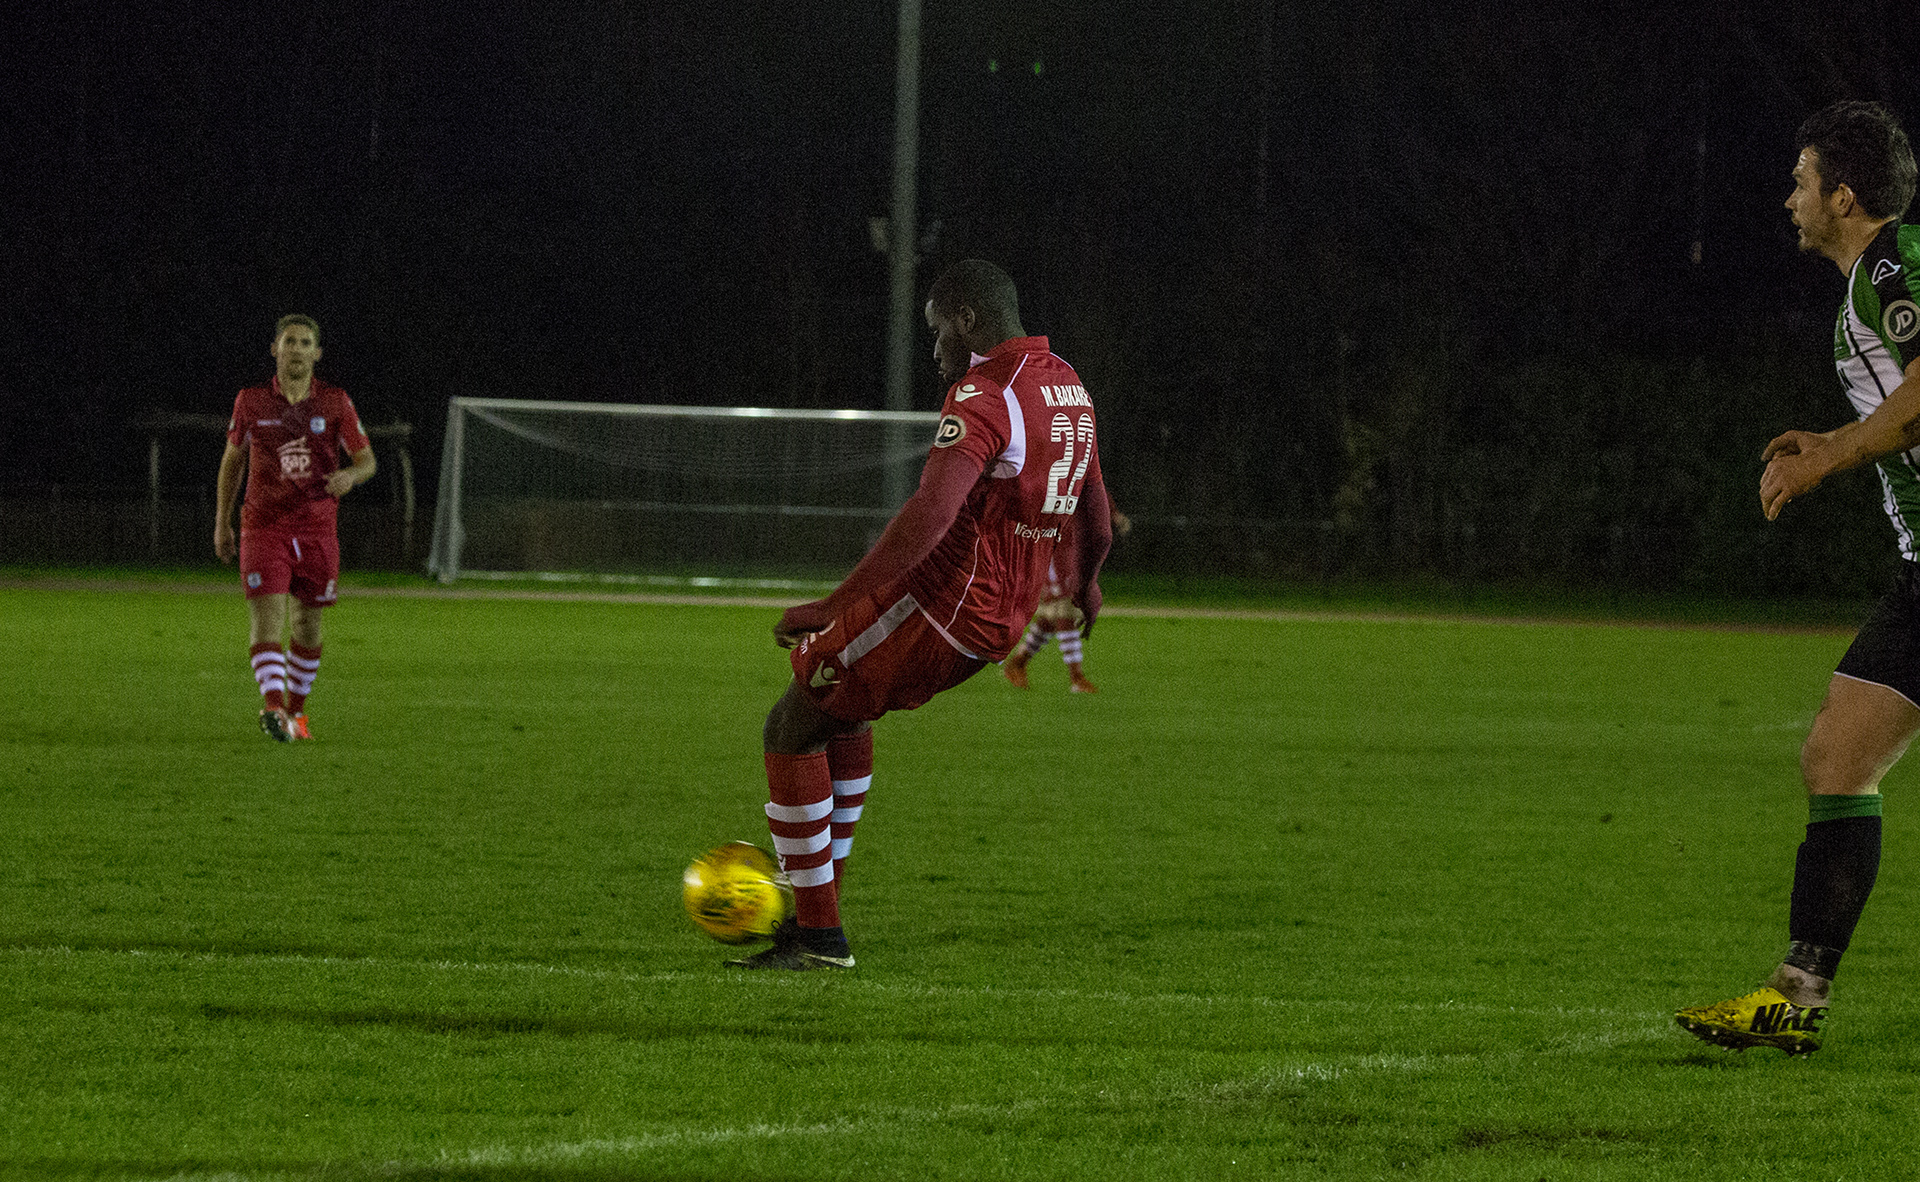 Michael Bakare scores a spectacular right-footed effort - © NCM Media